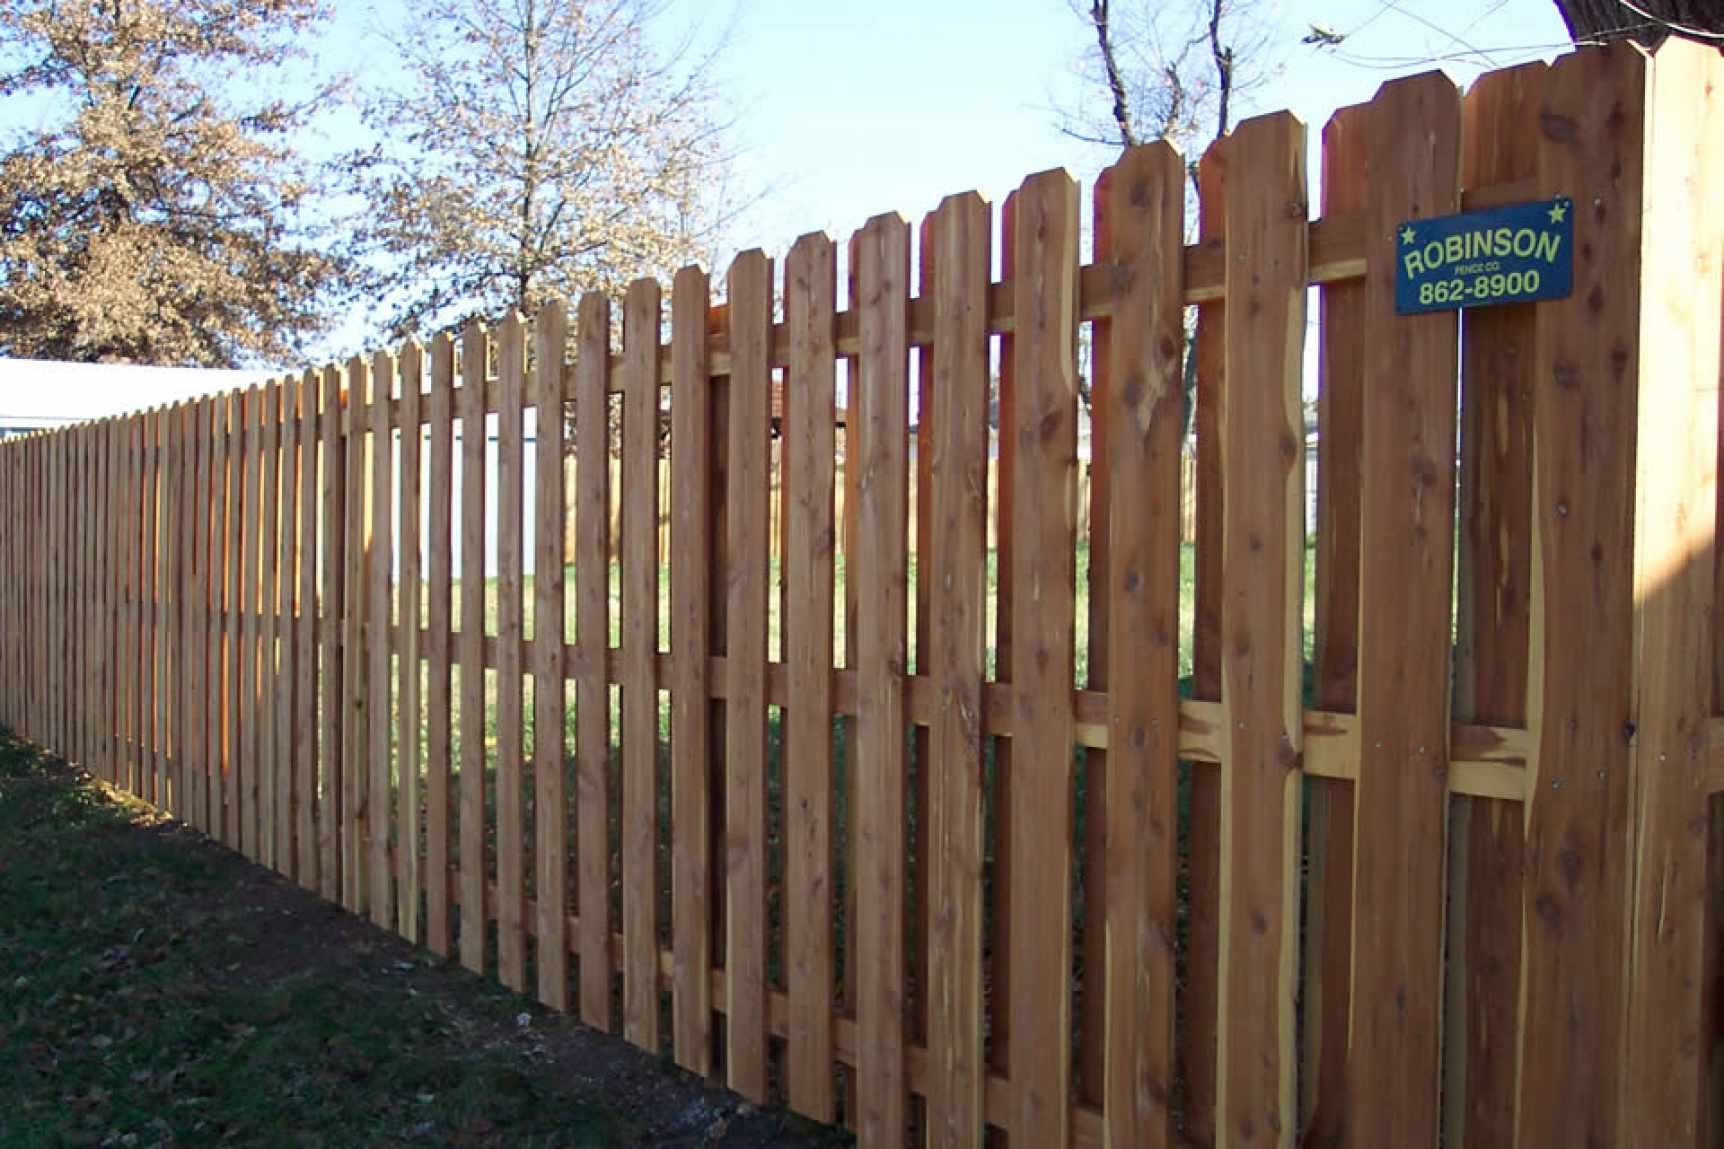 Wood Fence | Robinson Fence Springfield, MO - Wood Fencing, Chain ...